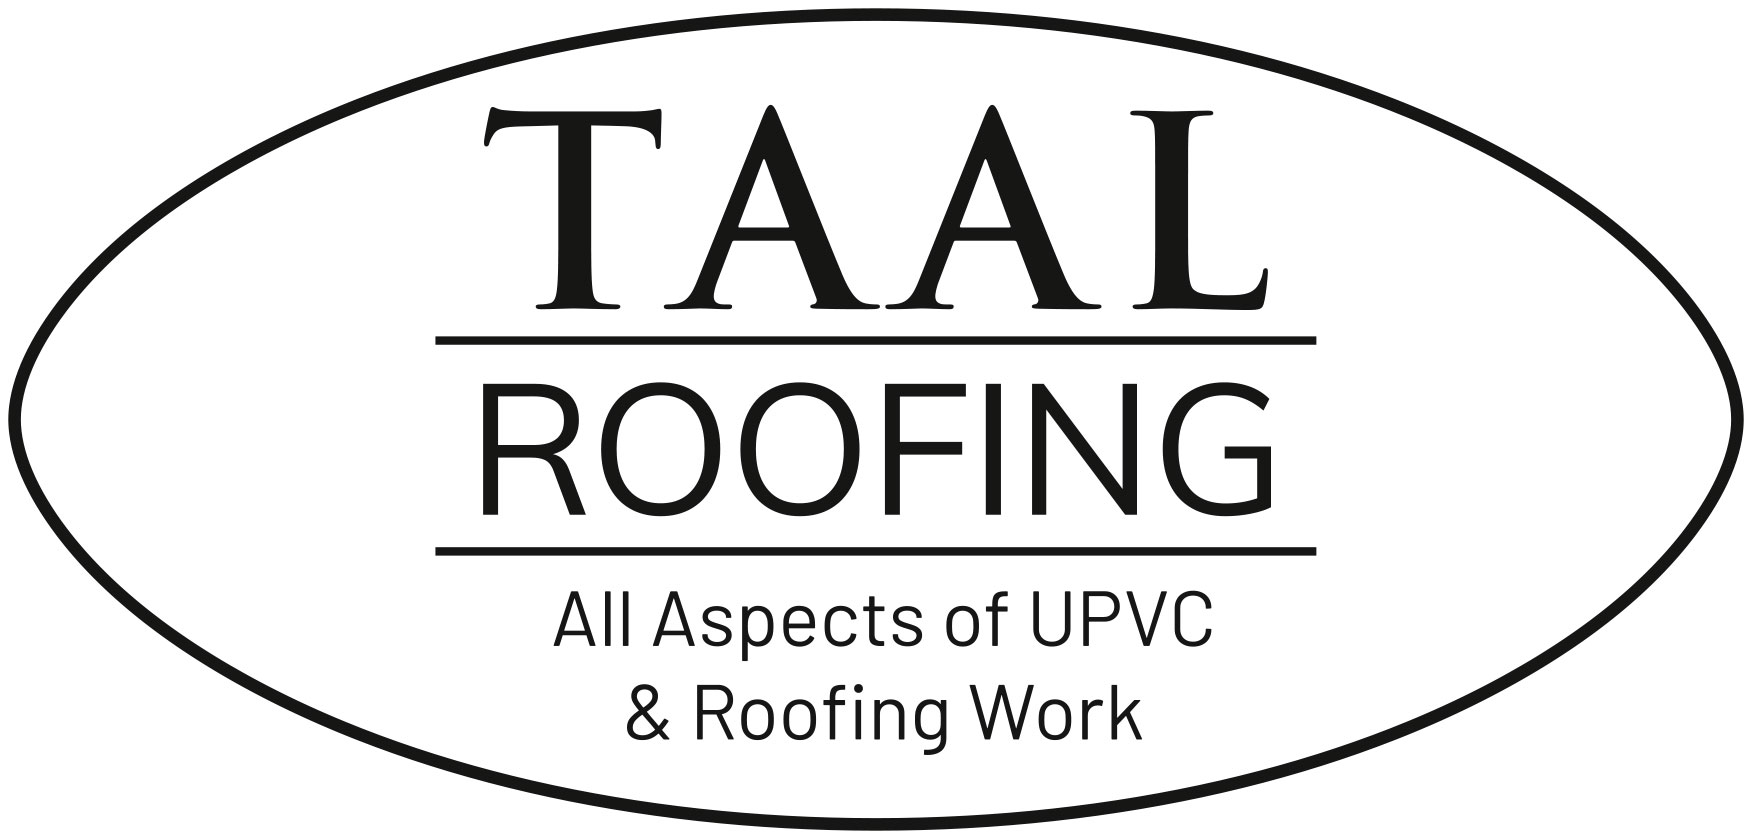 TAAL Roofing